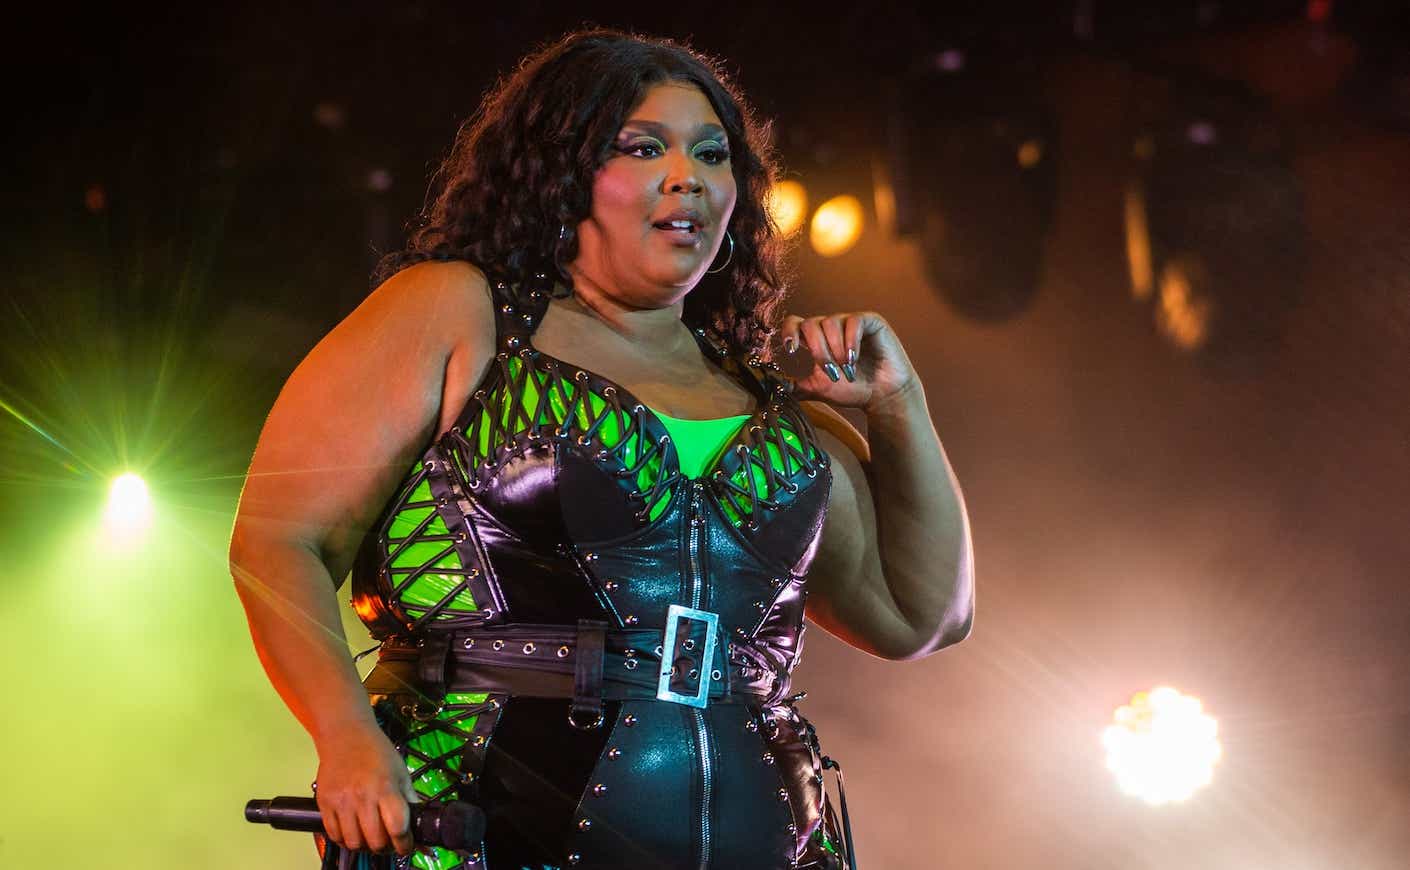 lizzo performing on stage